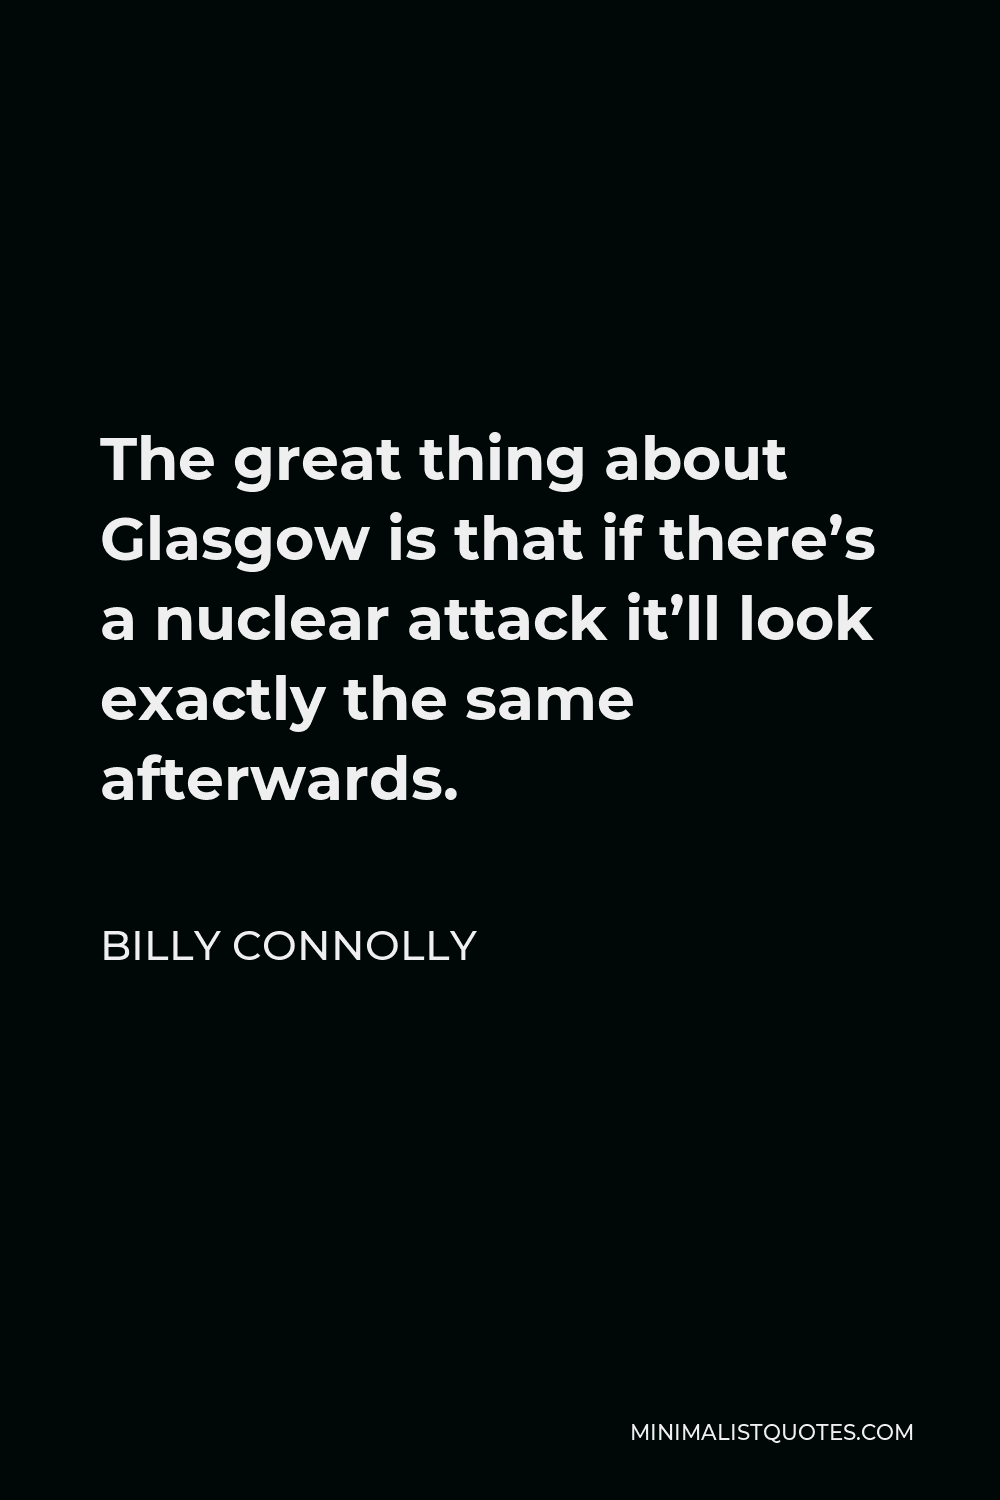 Billy Connolly Quote - The great thing about Glasgow is that if there’s a nuclear attack it’ll look exactly the same afterwards.